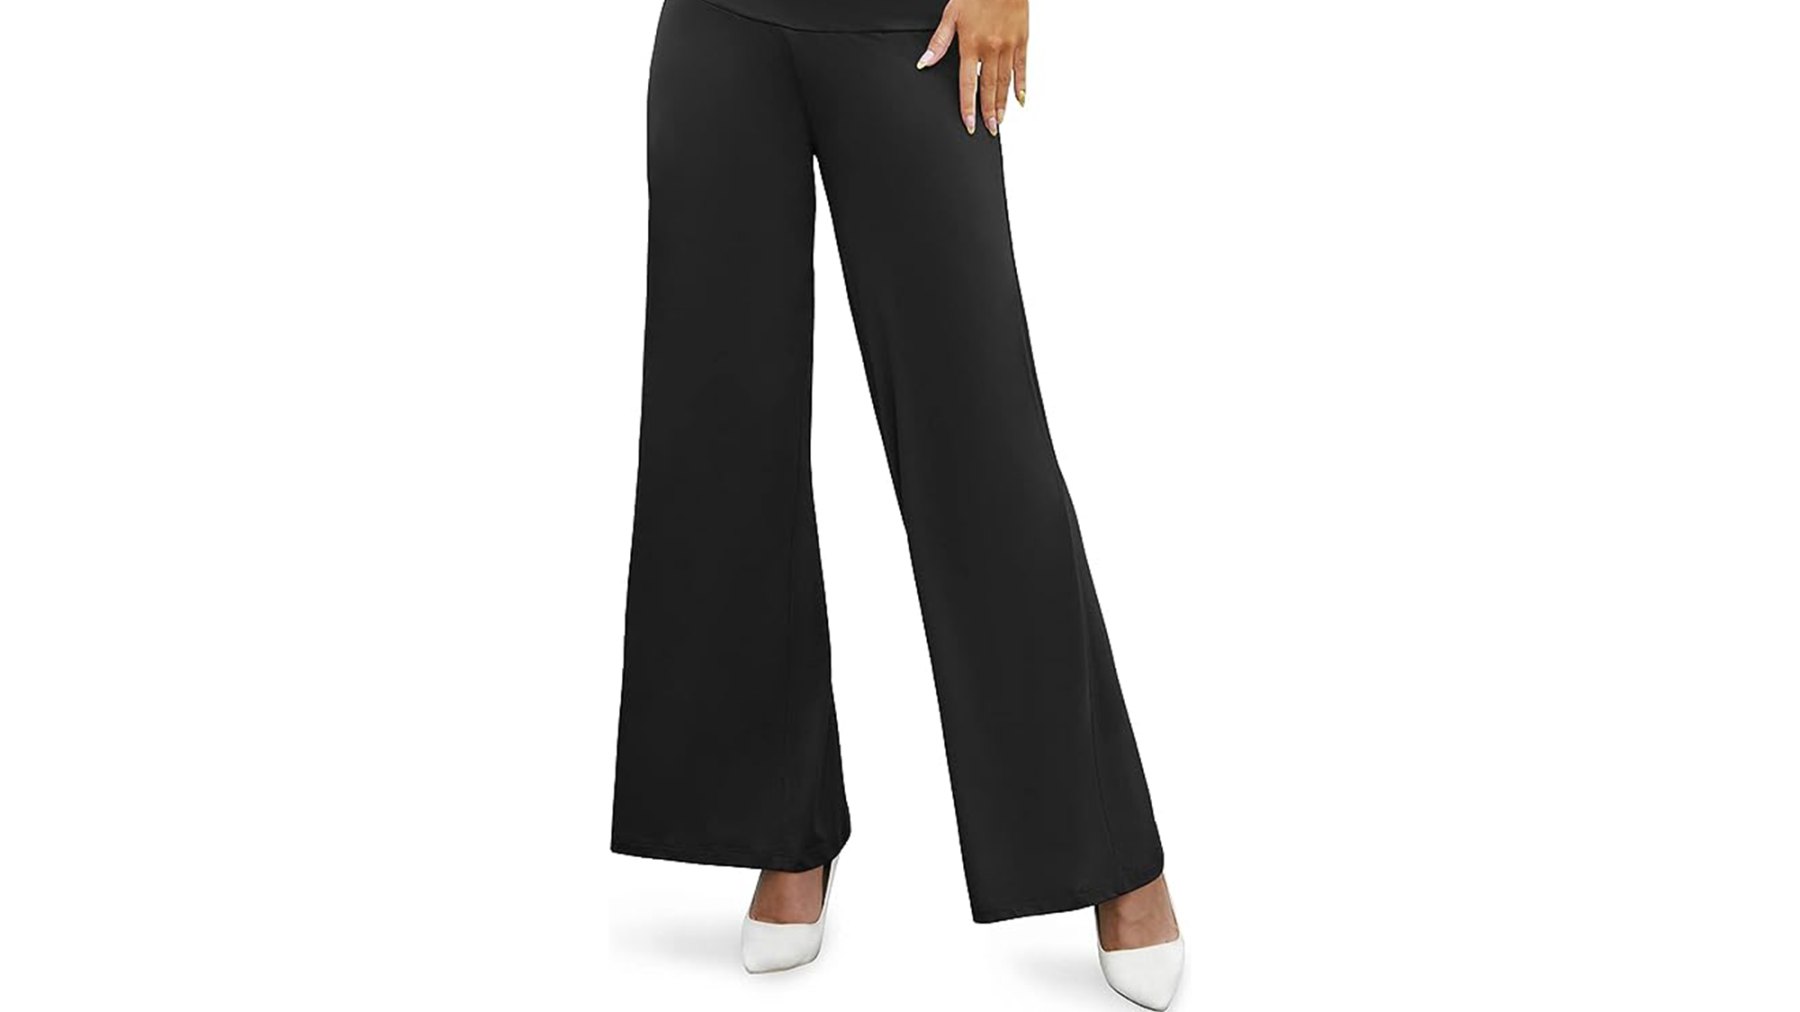 Amazon Palazzo Pants Have Thousands of 5-Star Reviews | Us Weekly